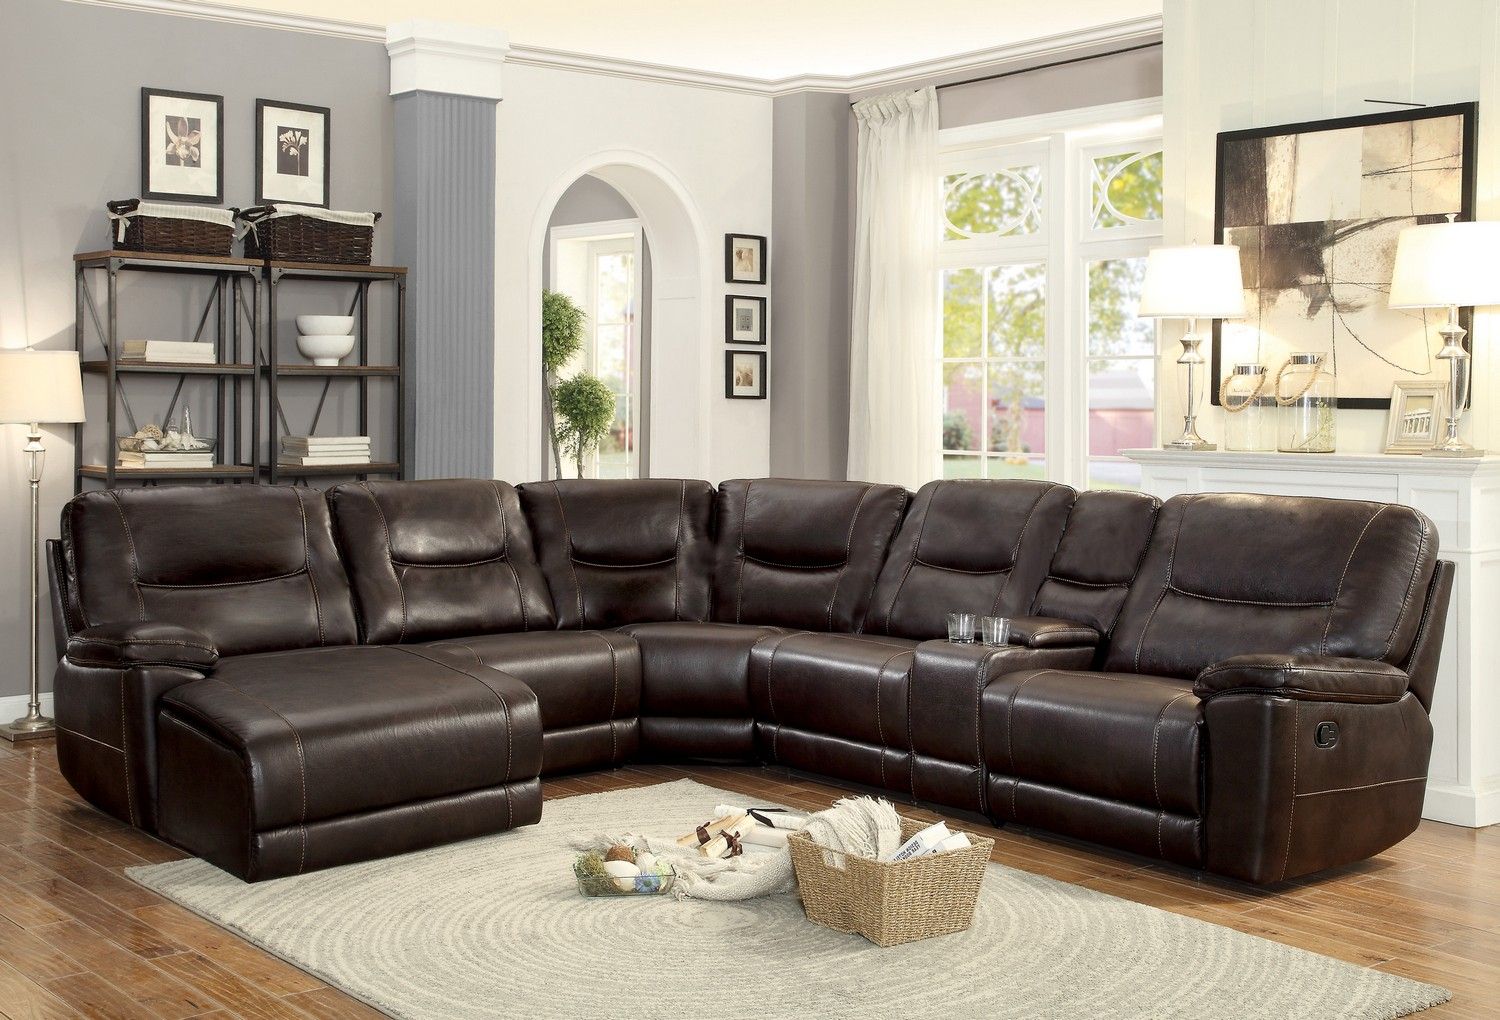 Homelegance Columbus Reclining Sectional Sofa Set B – Breathable Faux In Faux Leather Sofas In Dark Brown (View 2 of 20)